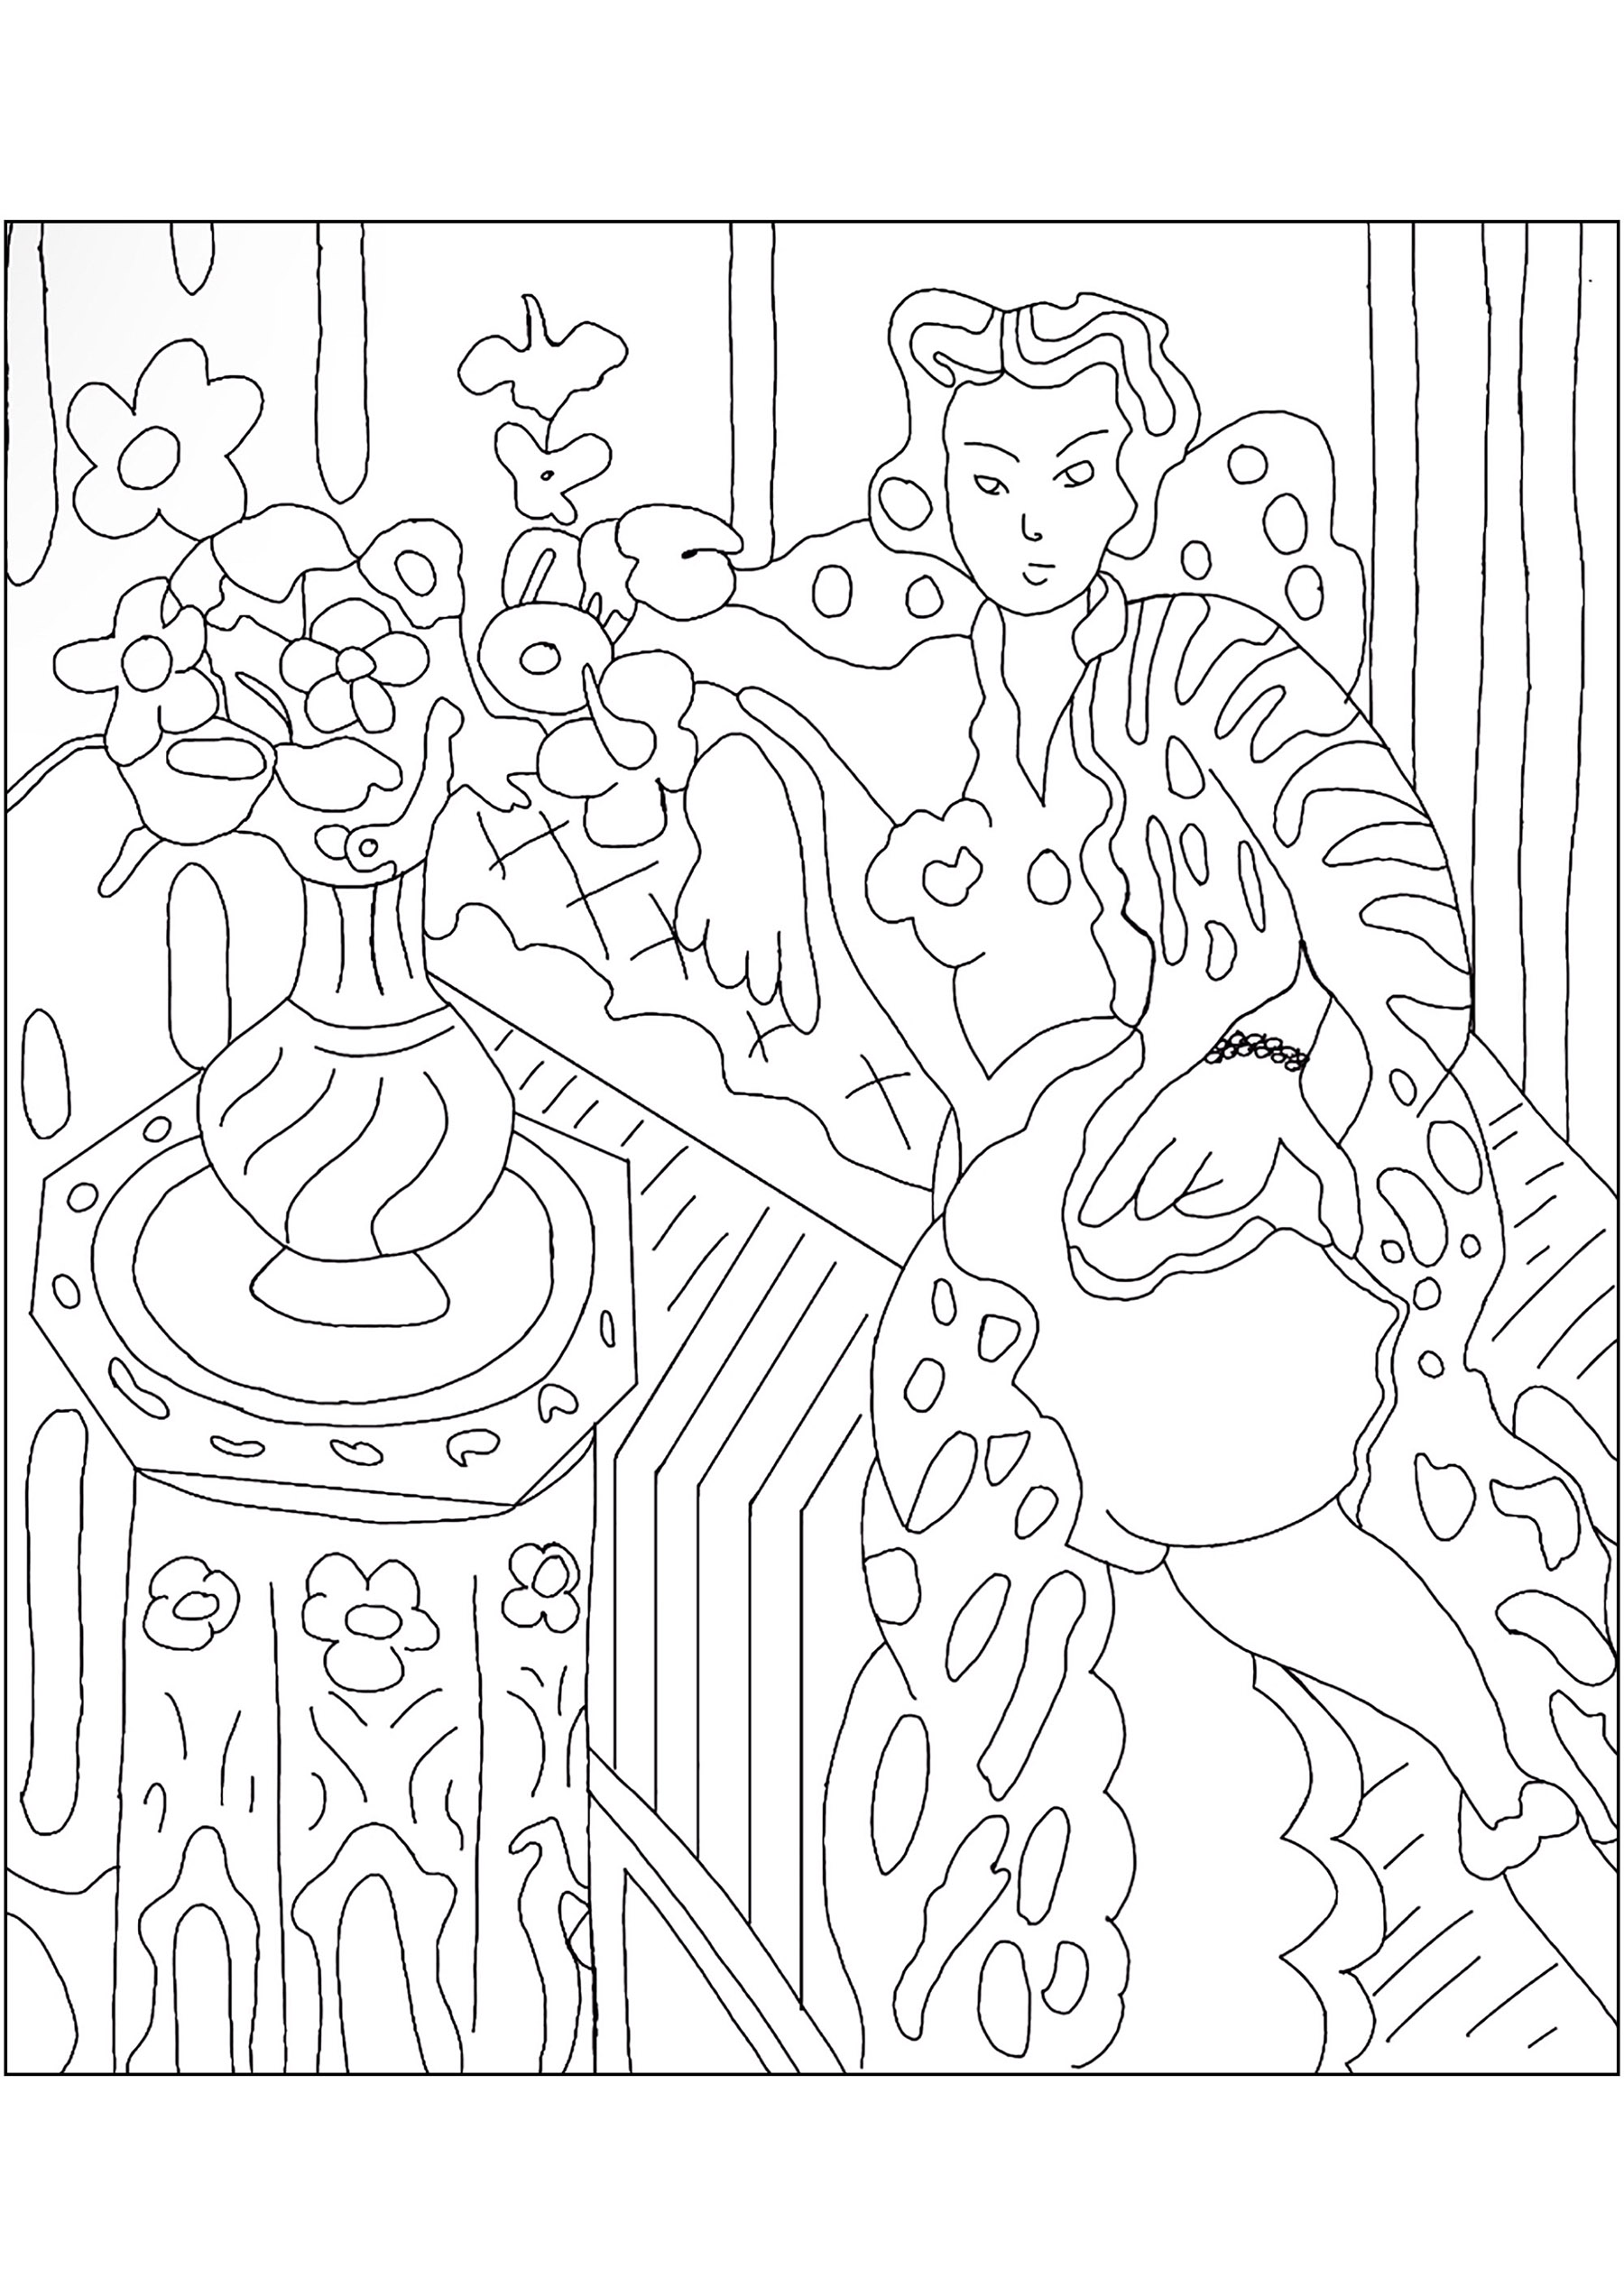 Coloring based on Henri Matisse's painting 'Odalisque in a Persian dress' (1937)